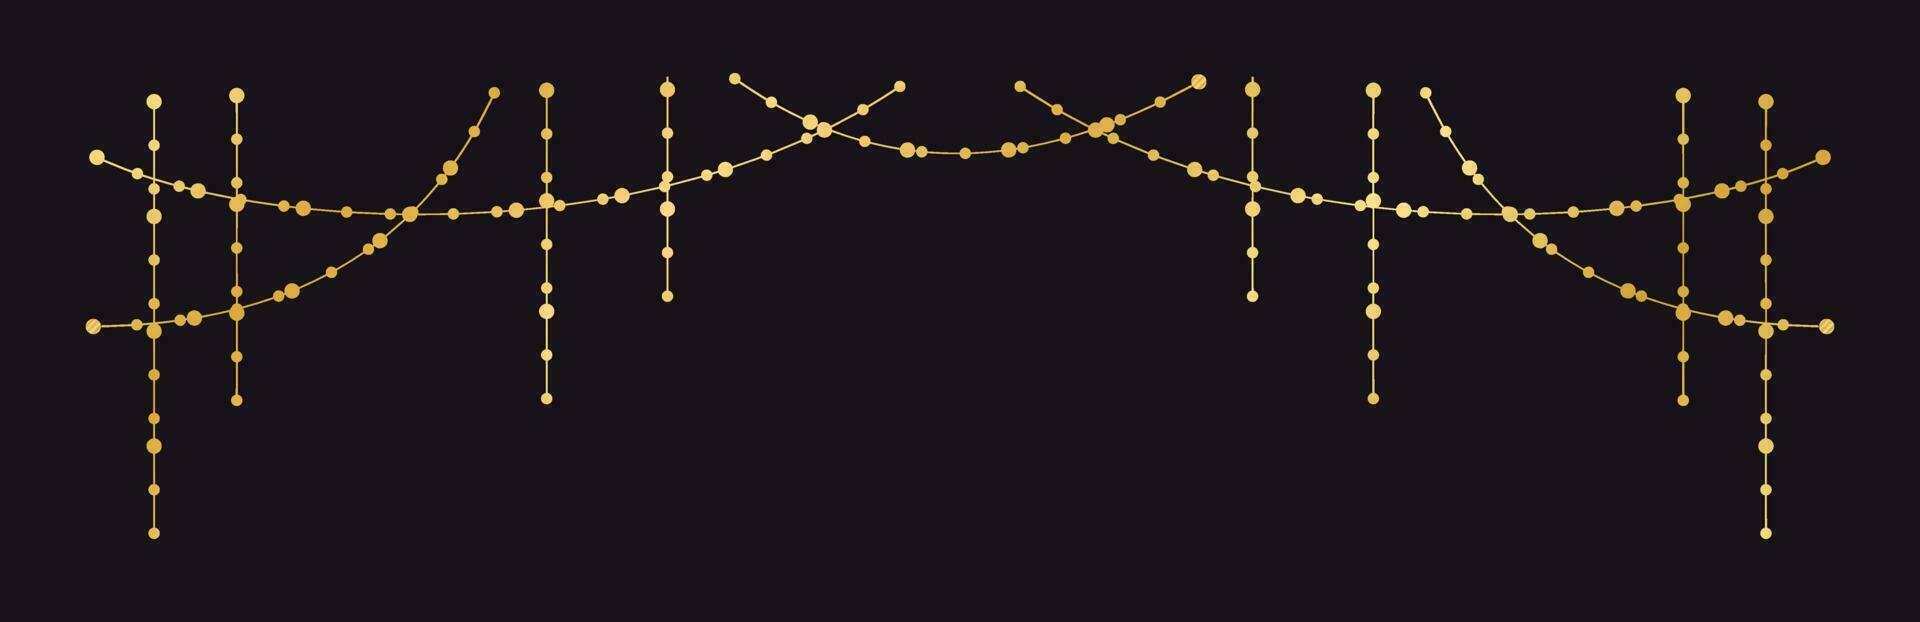 Vector horizontal border of abstract gold string light garlands. Festive decoration with shiny Christmas lights. Glowing bulbs of the different sizes.